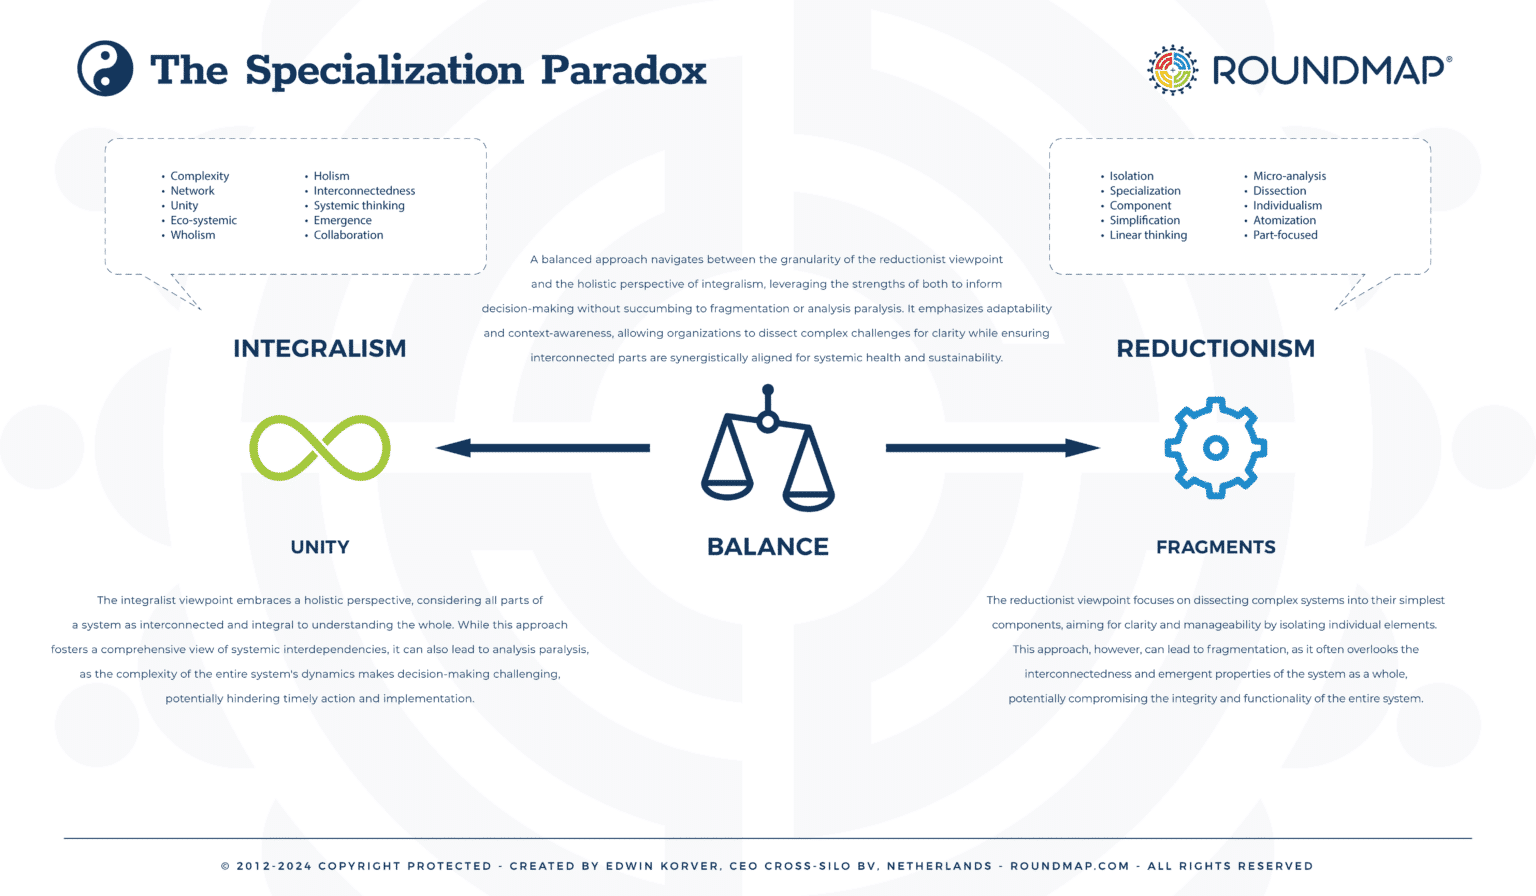 The Specialization Paradox